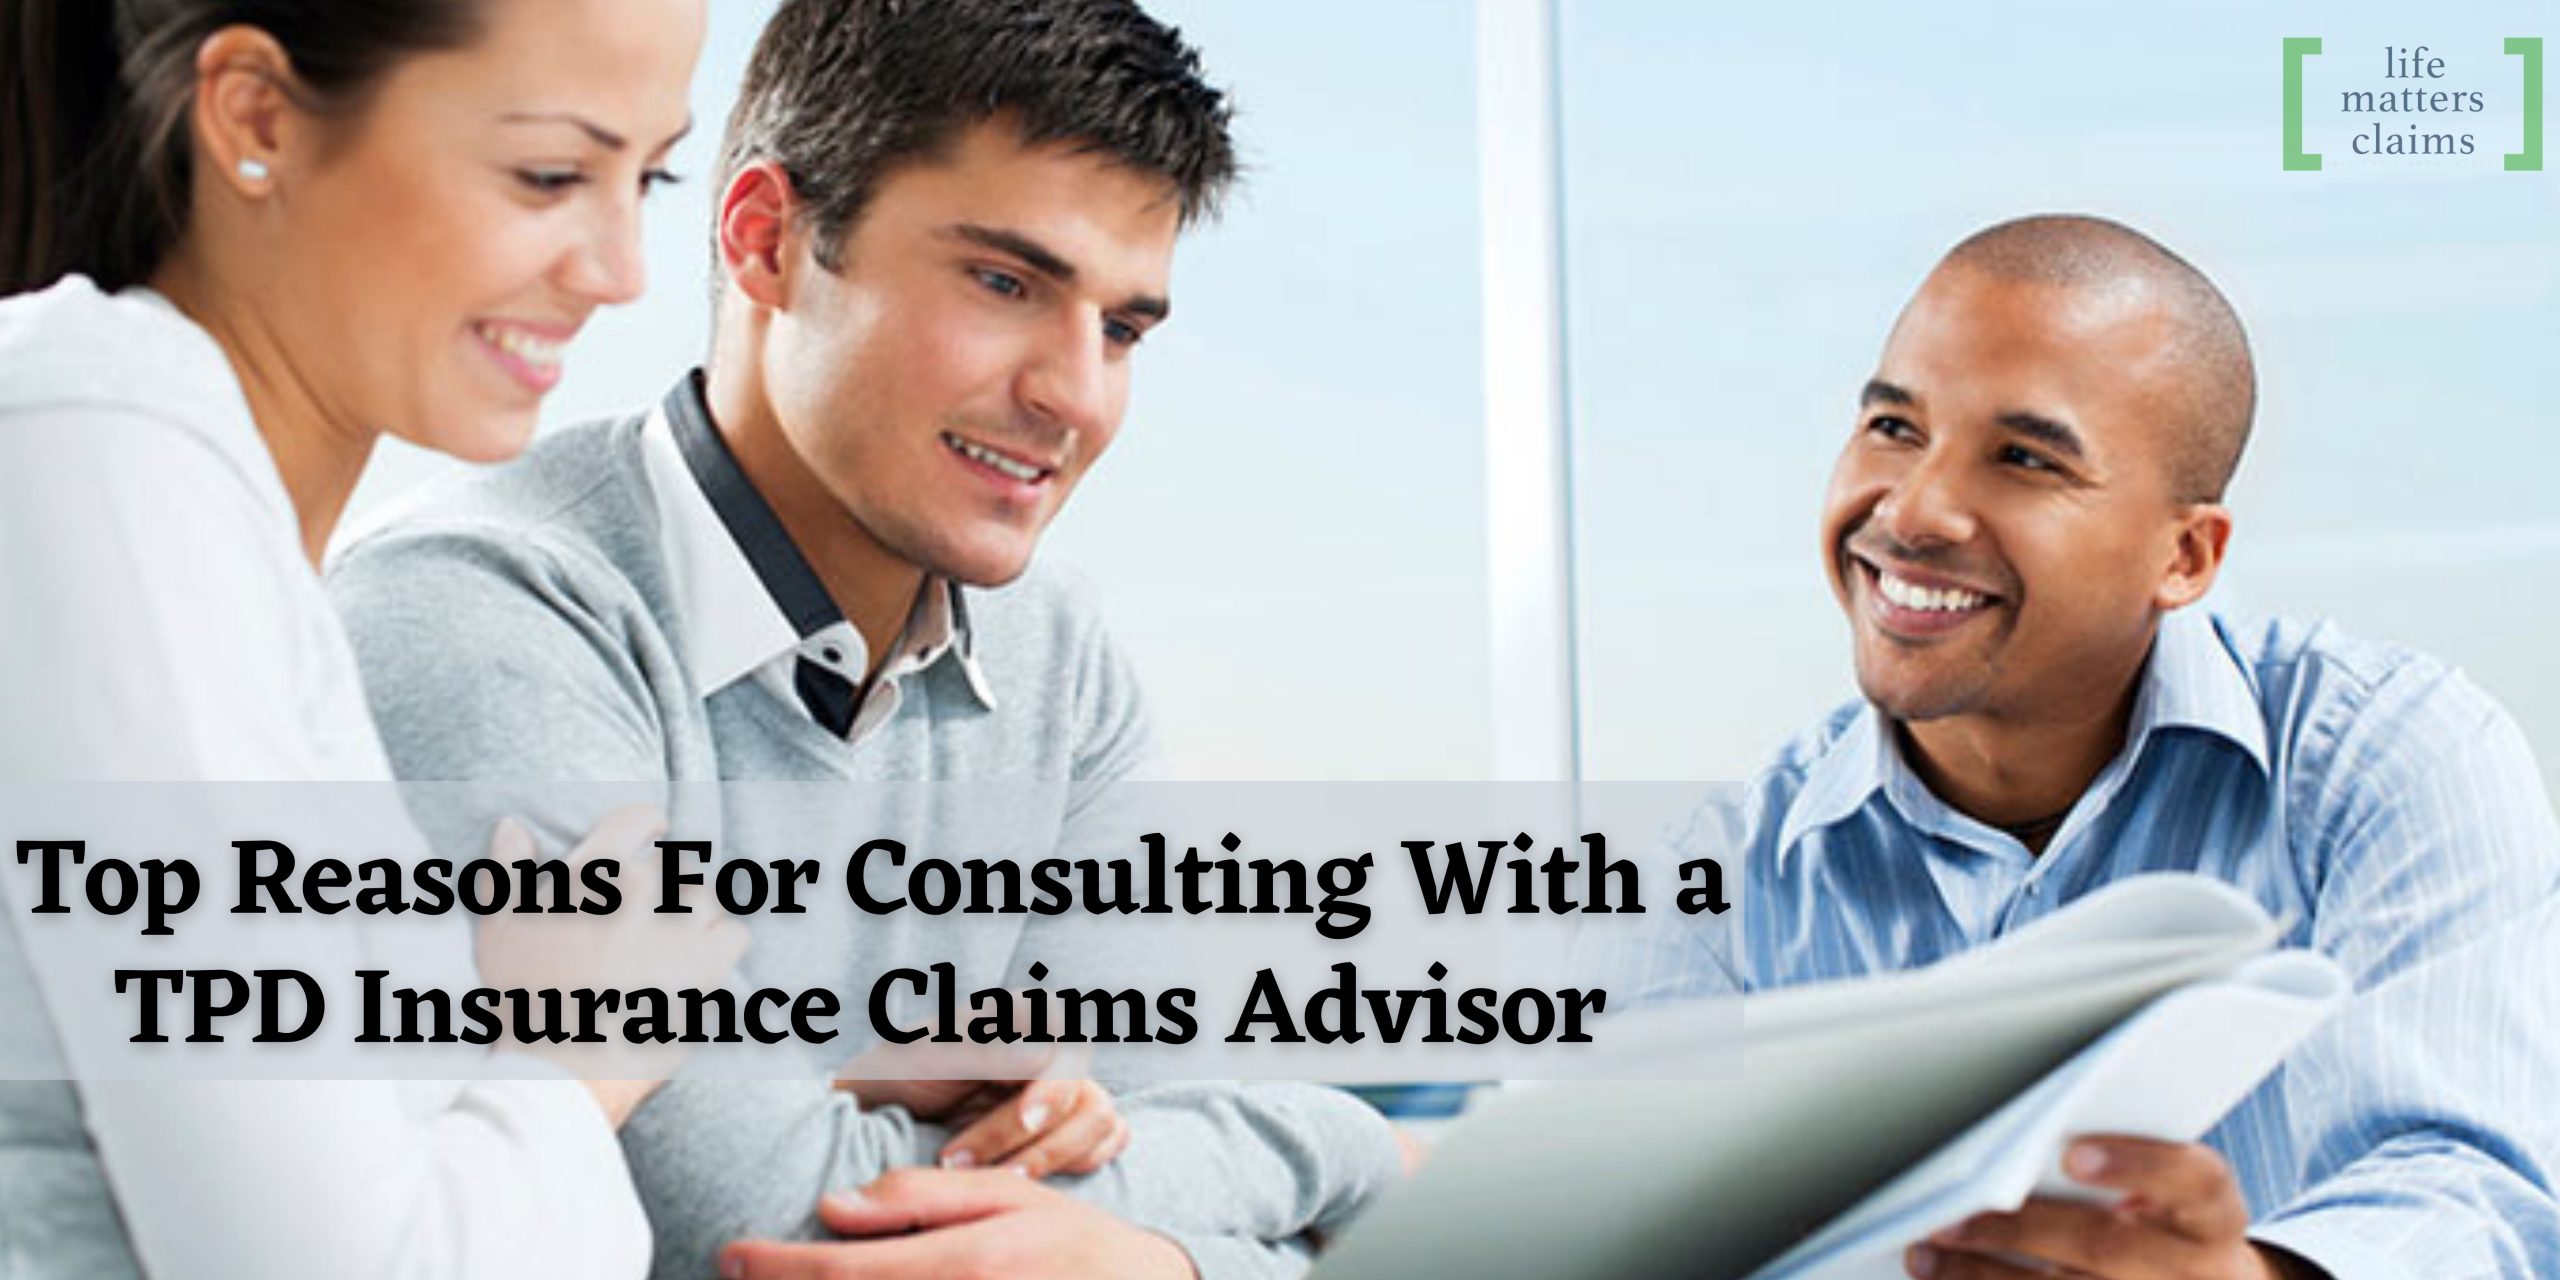 Top Reasons For Consulting With a TPD Insurance Claims Advisor